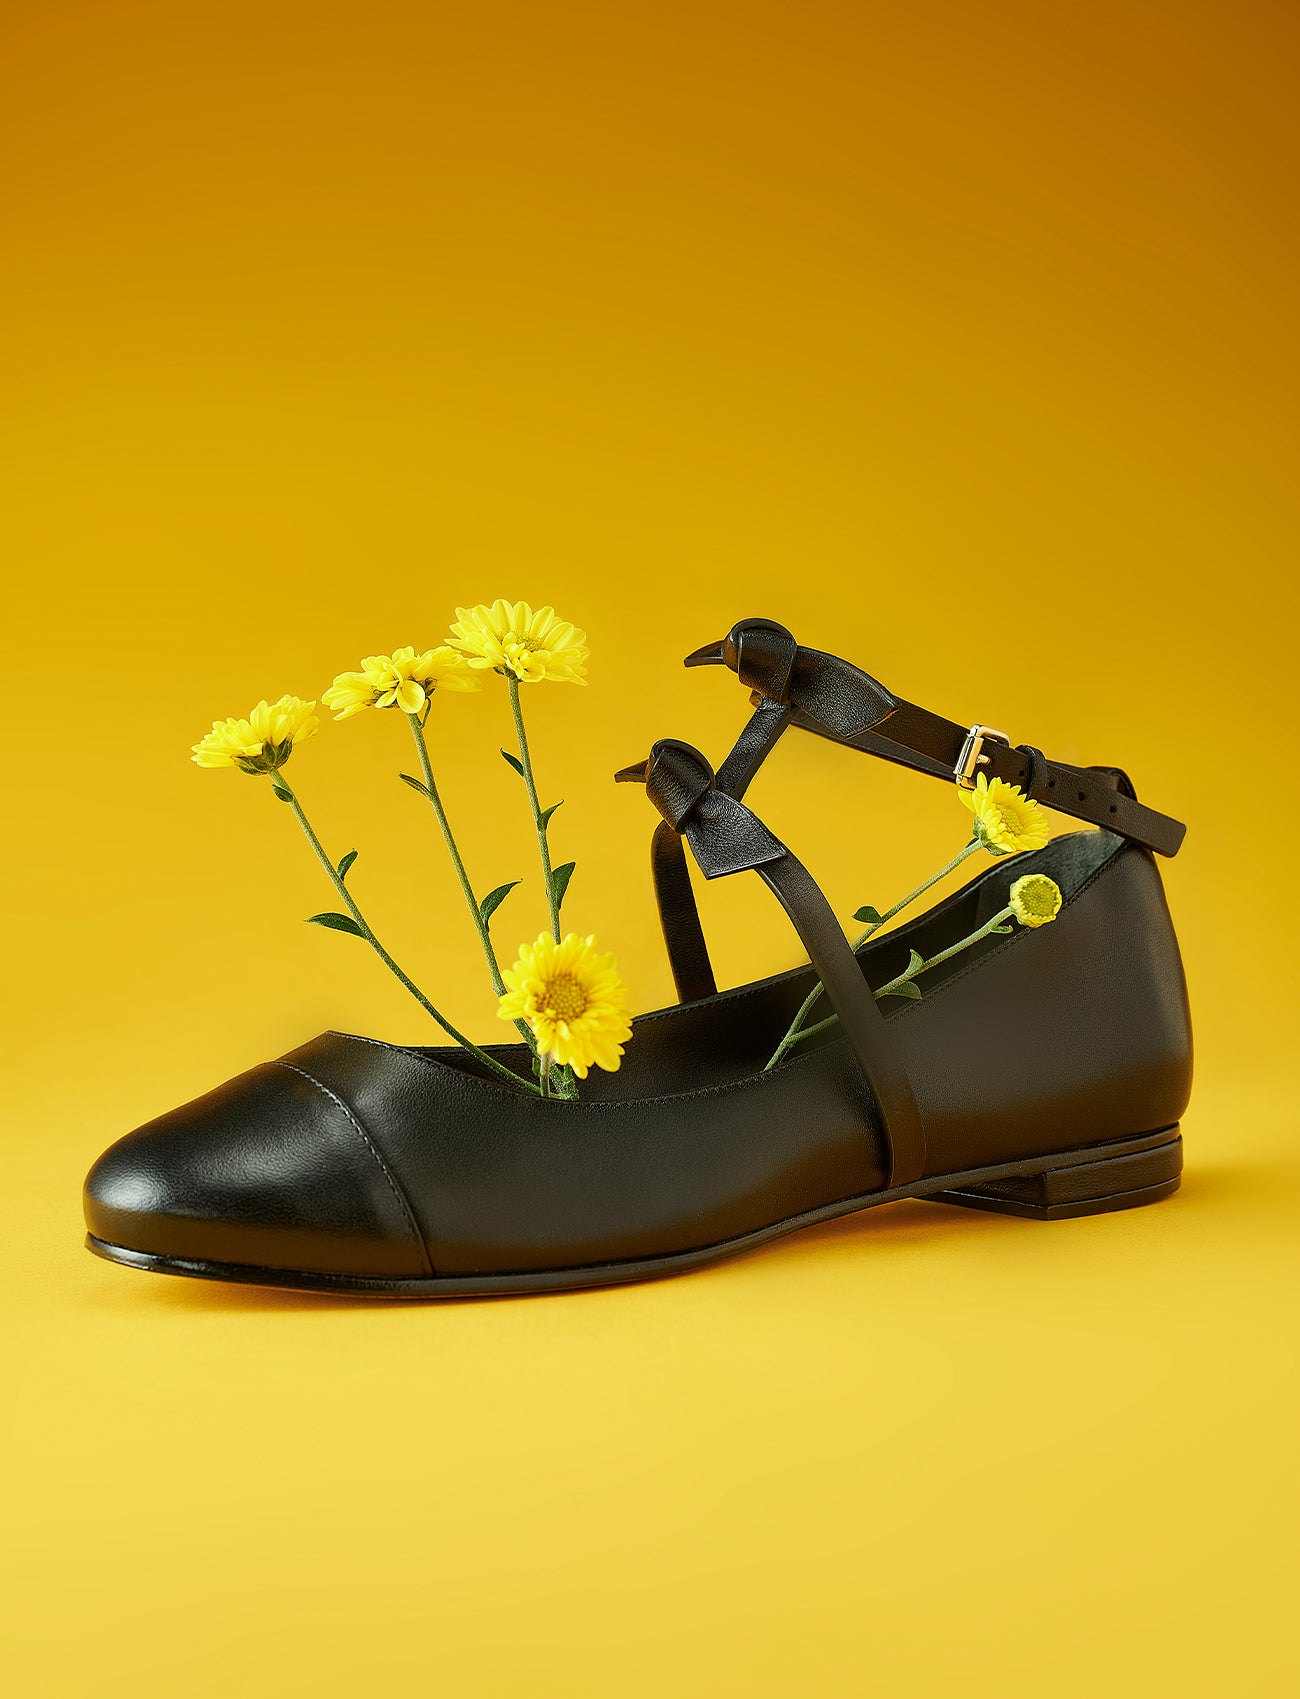 Introducing the Slim Clarita Ballet in Black. This exclusive design features elegant Clarita detailing, beautifully complemented by vibrant yellow chrysanthemum flowers against a matching background, adding a touch of artistry to your wardrobe.